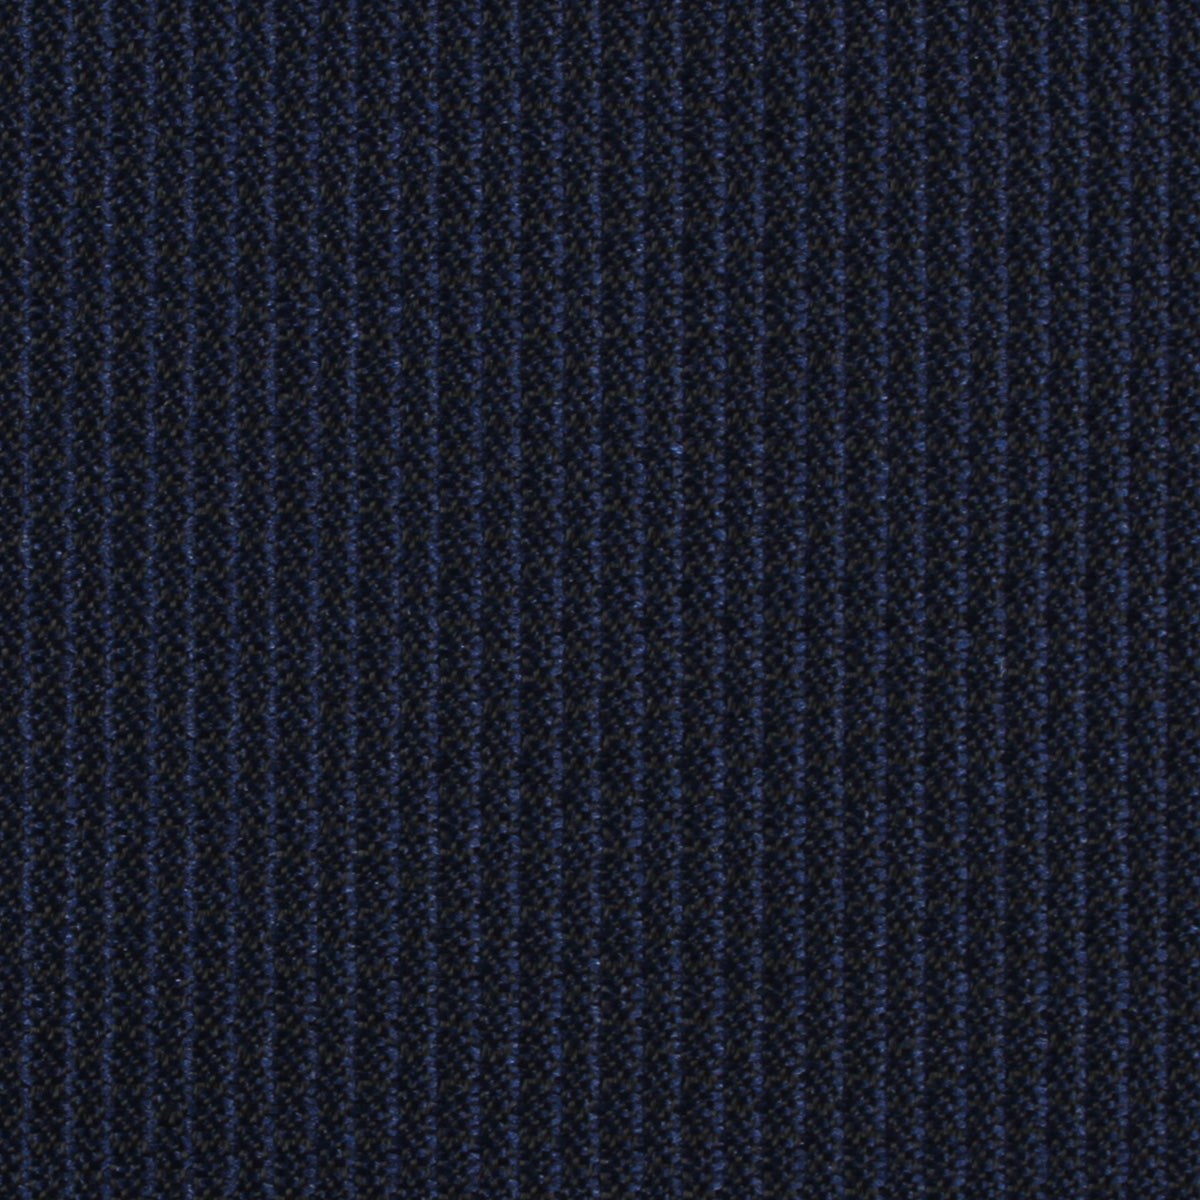 Navy Blue Weave Bow Tie Fabric